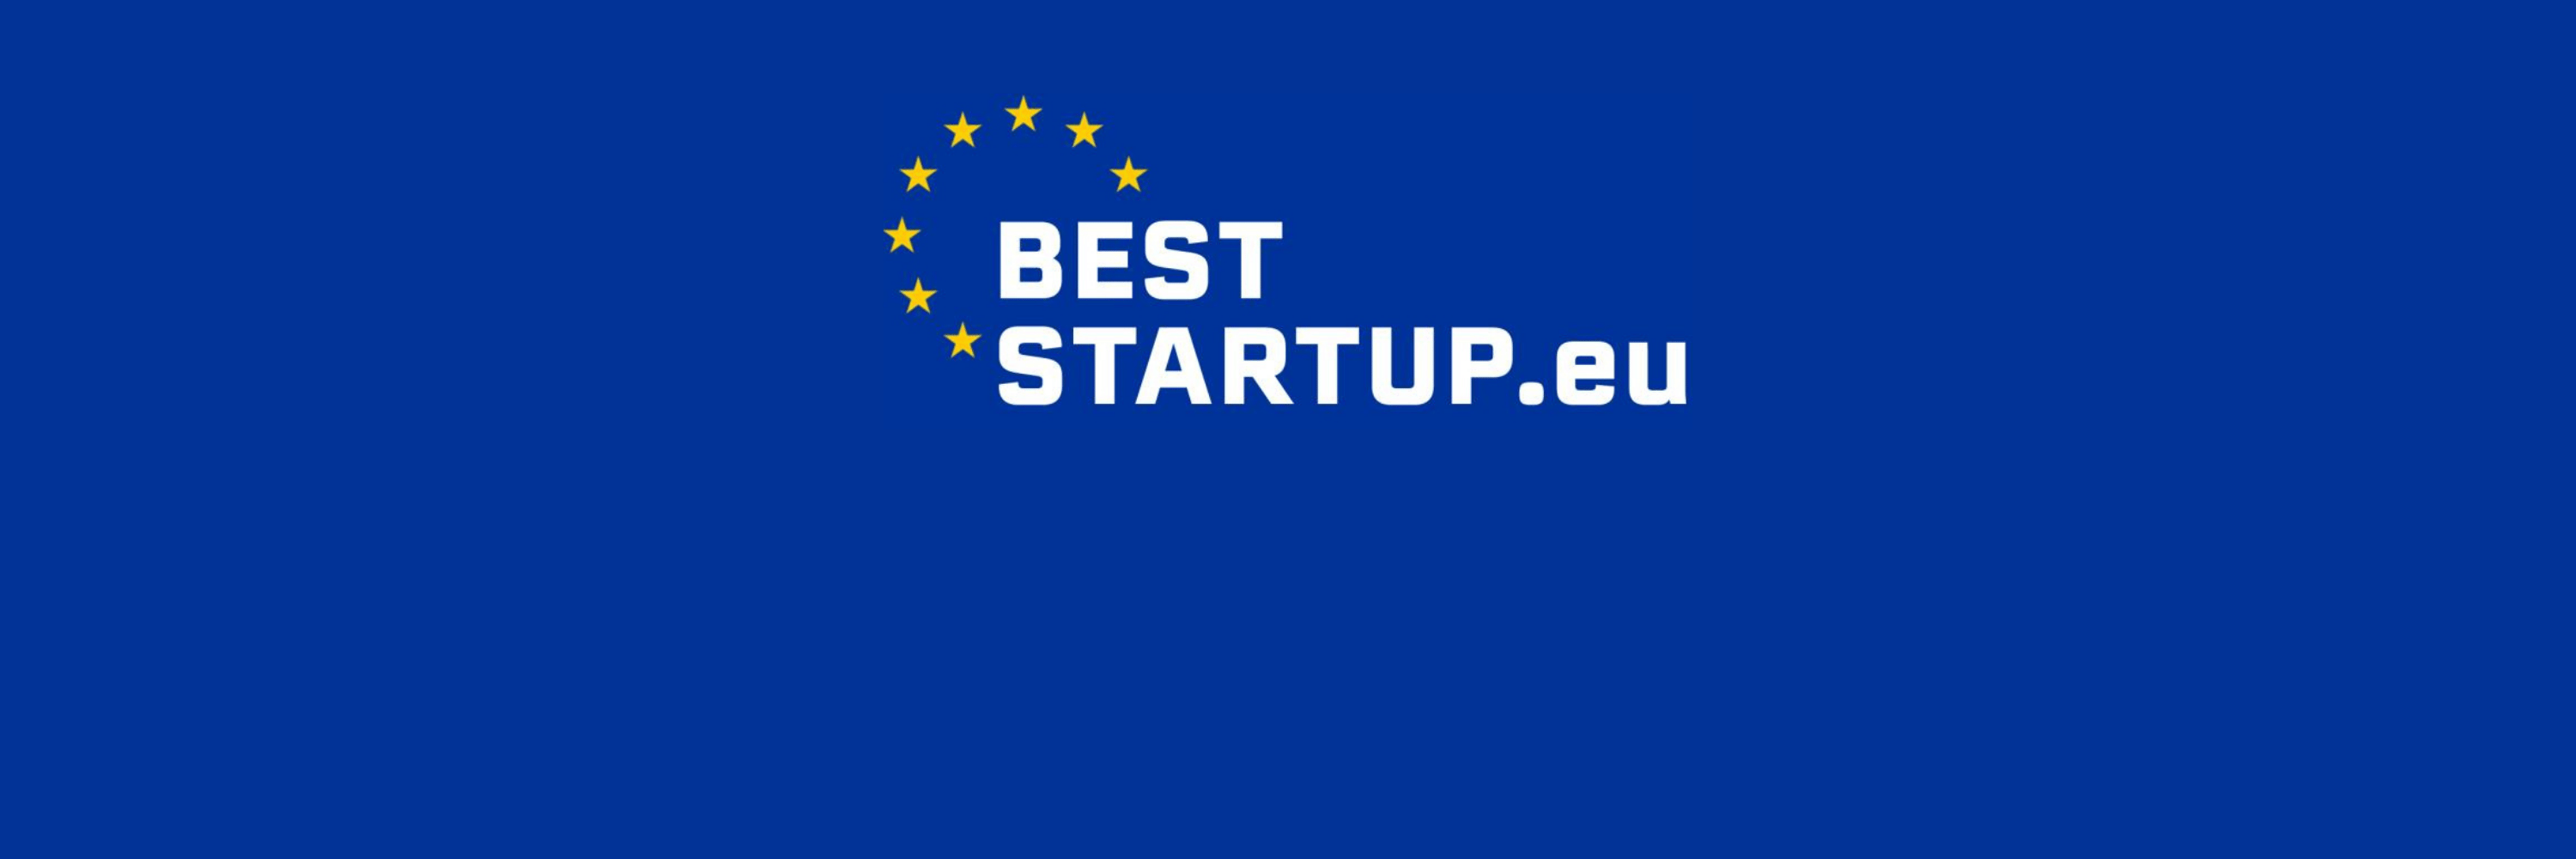 Logo for best startup.eu who named Duelbox among the top event companies in Hungary